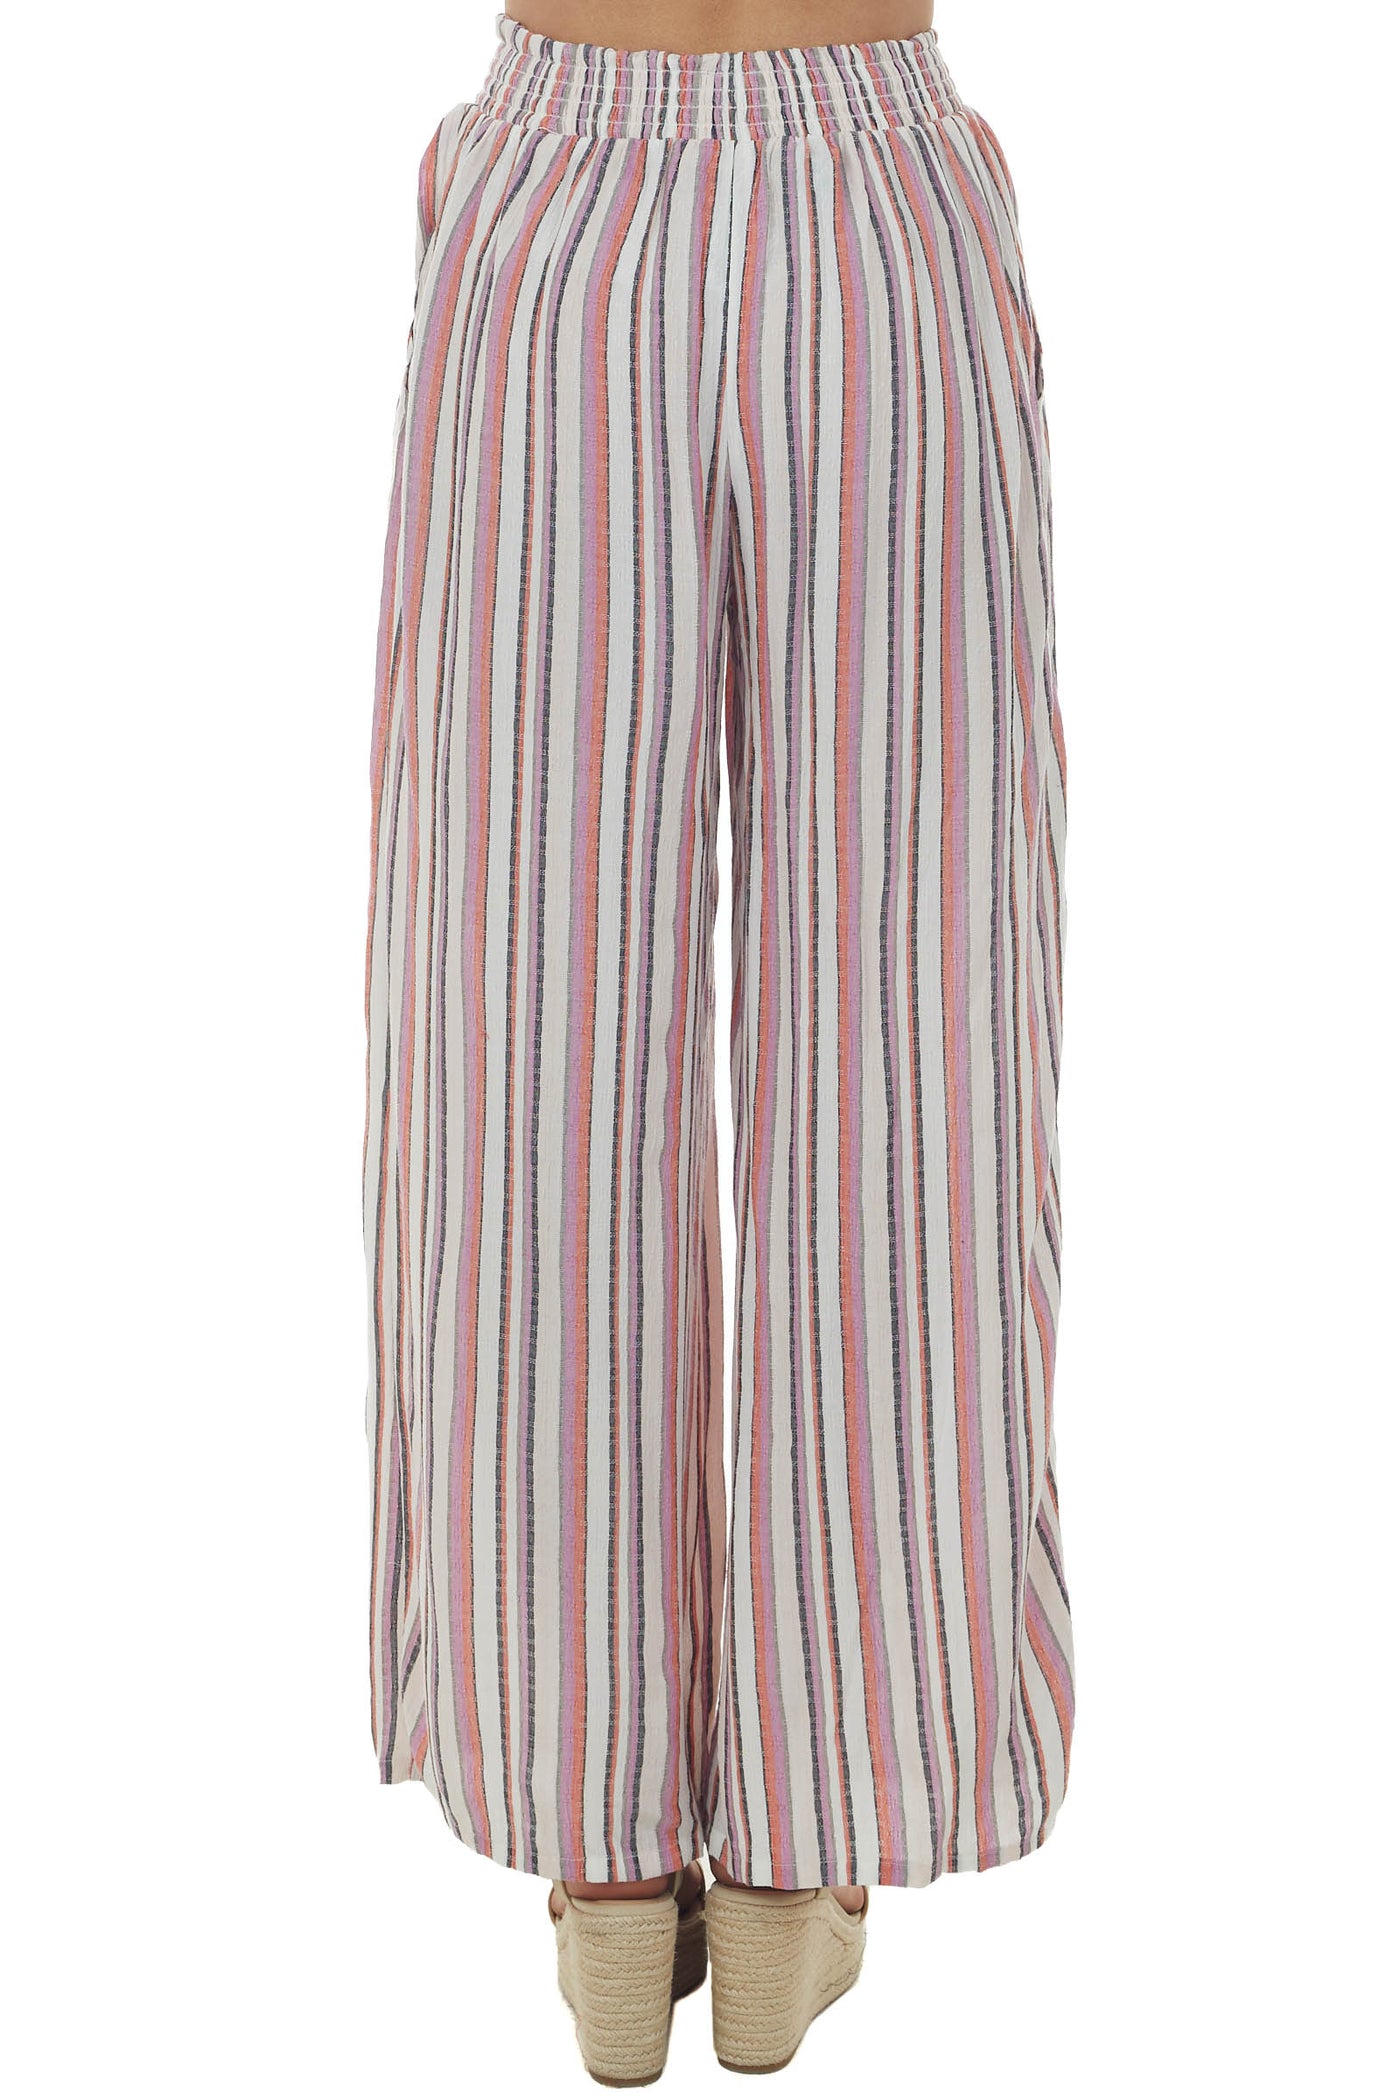 Coral Striped Pants with Smocked Waist Tie